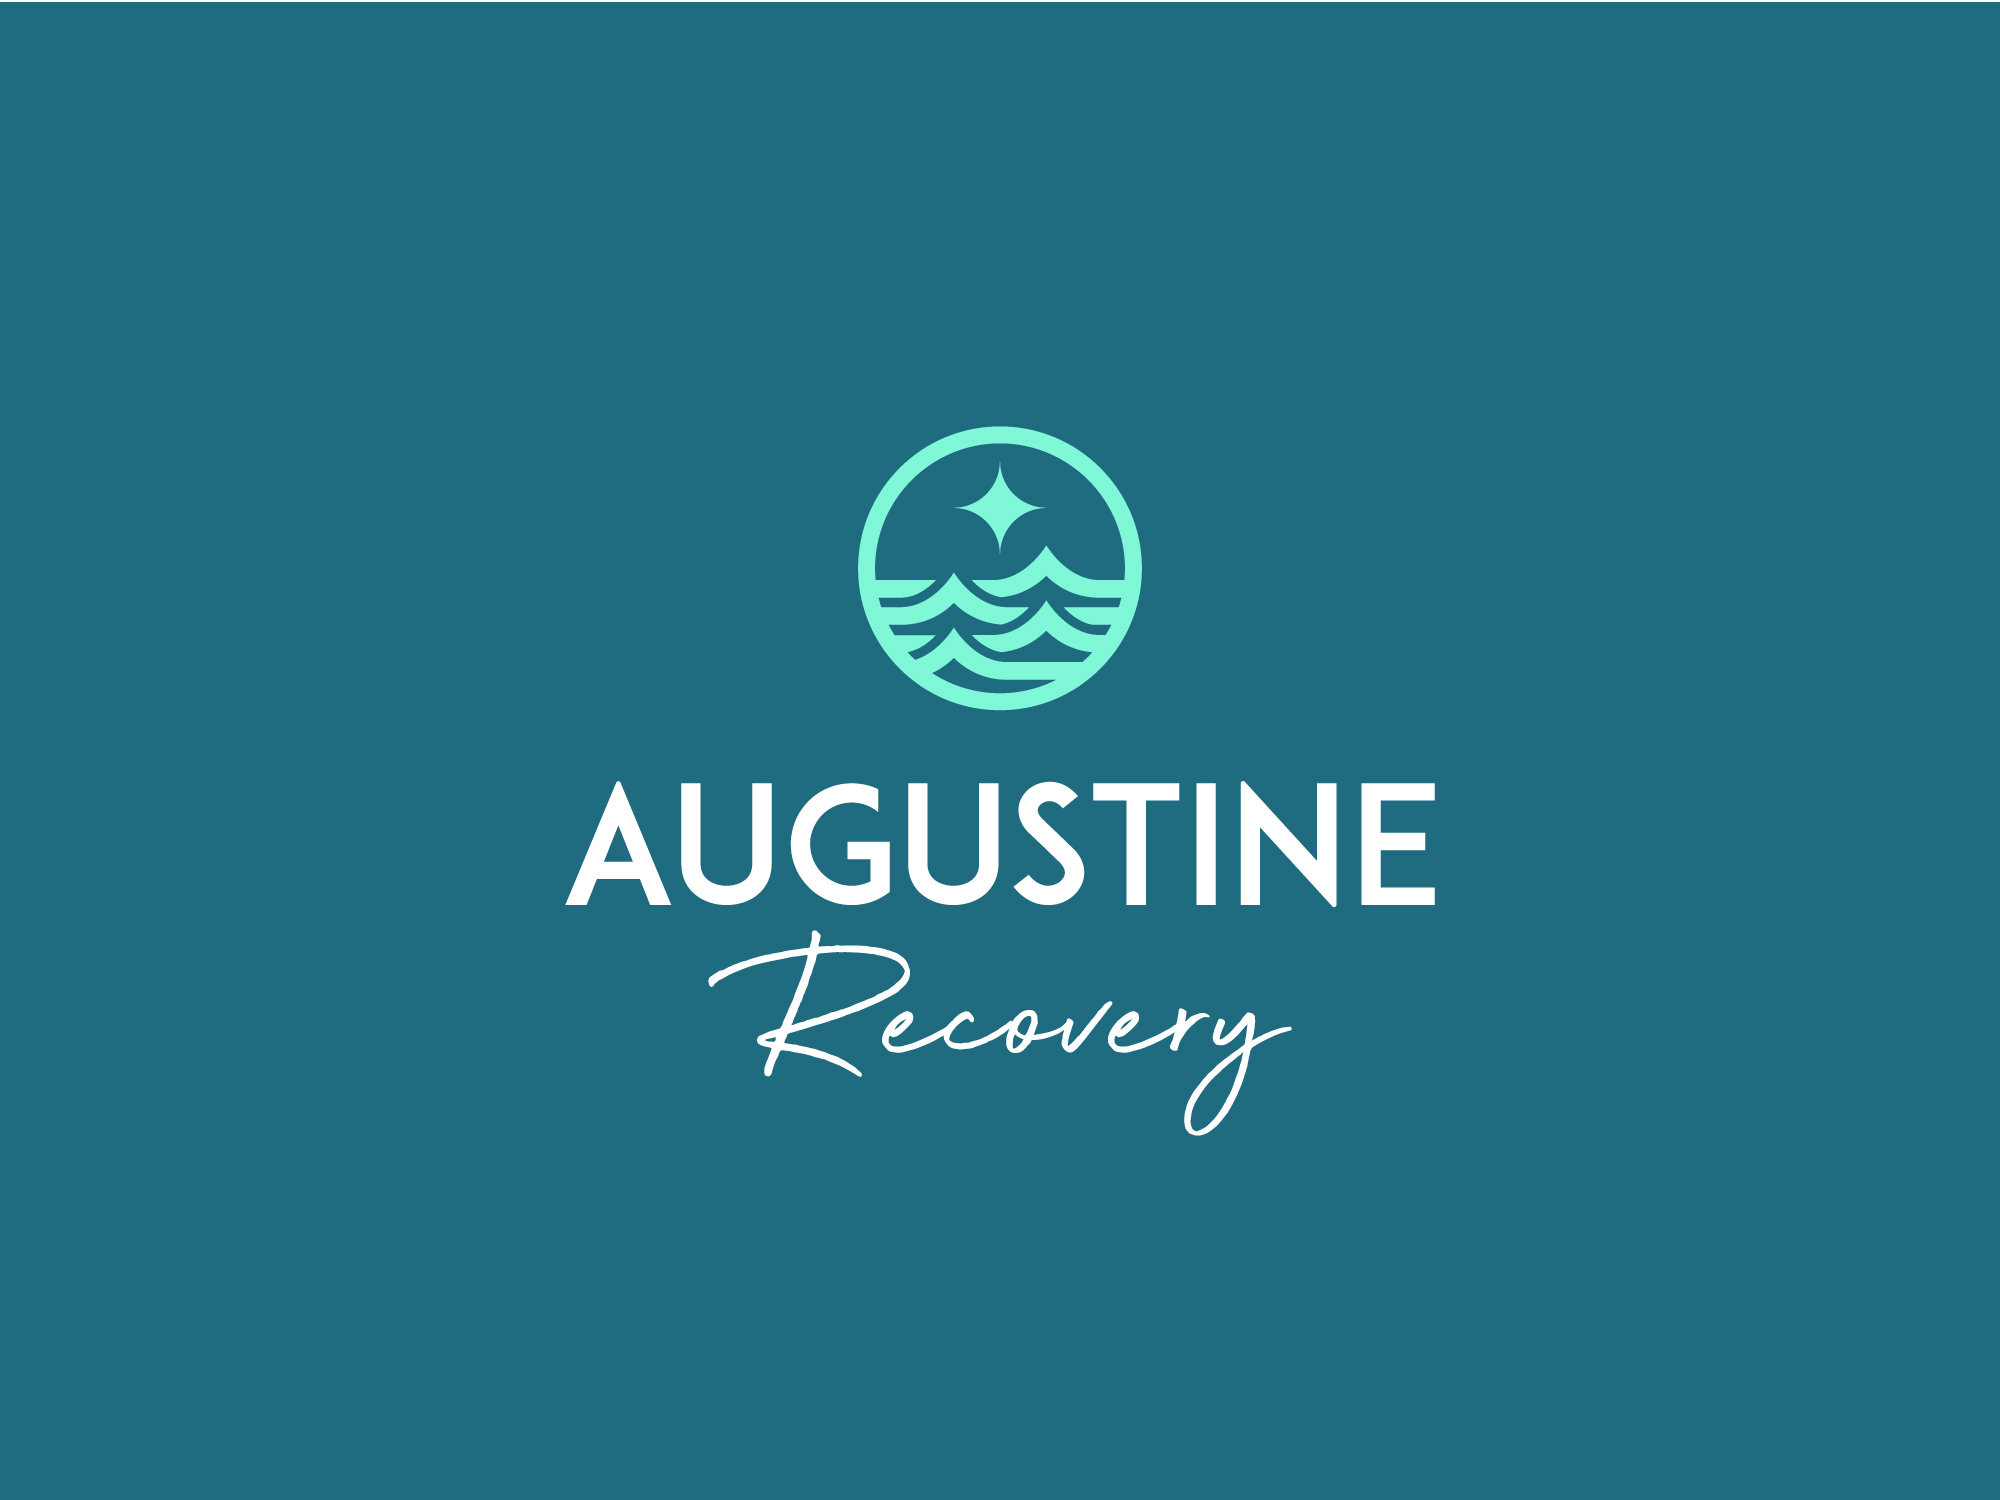 Augustine Recovery rebrand and new website